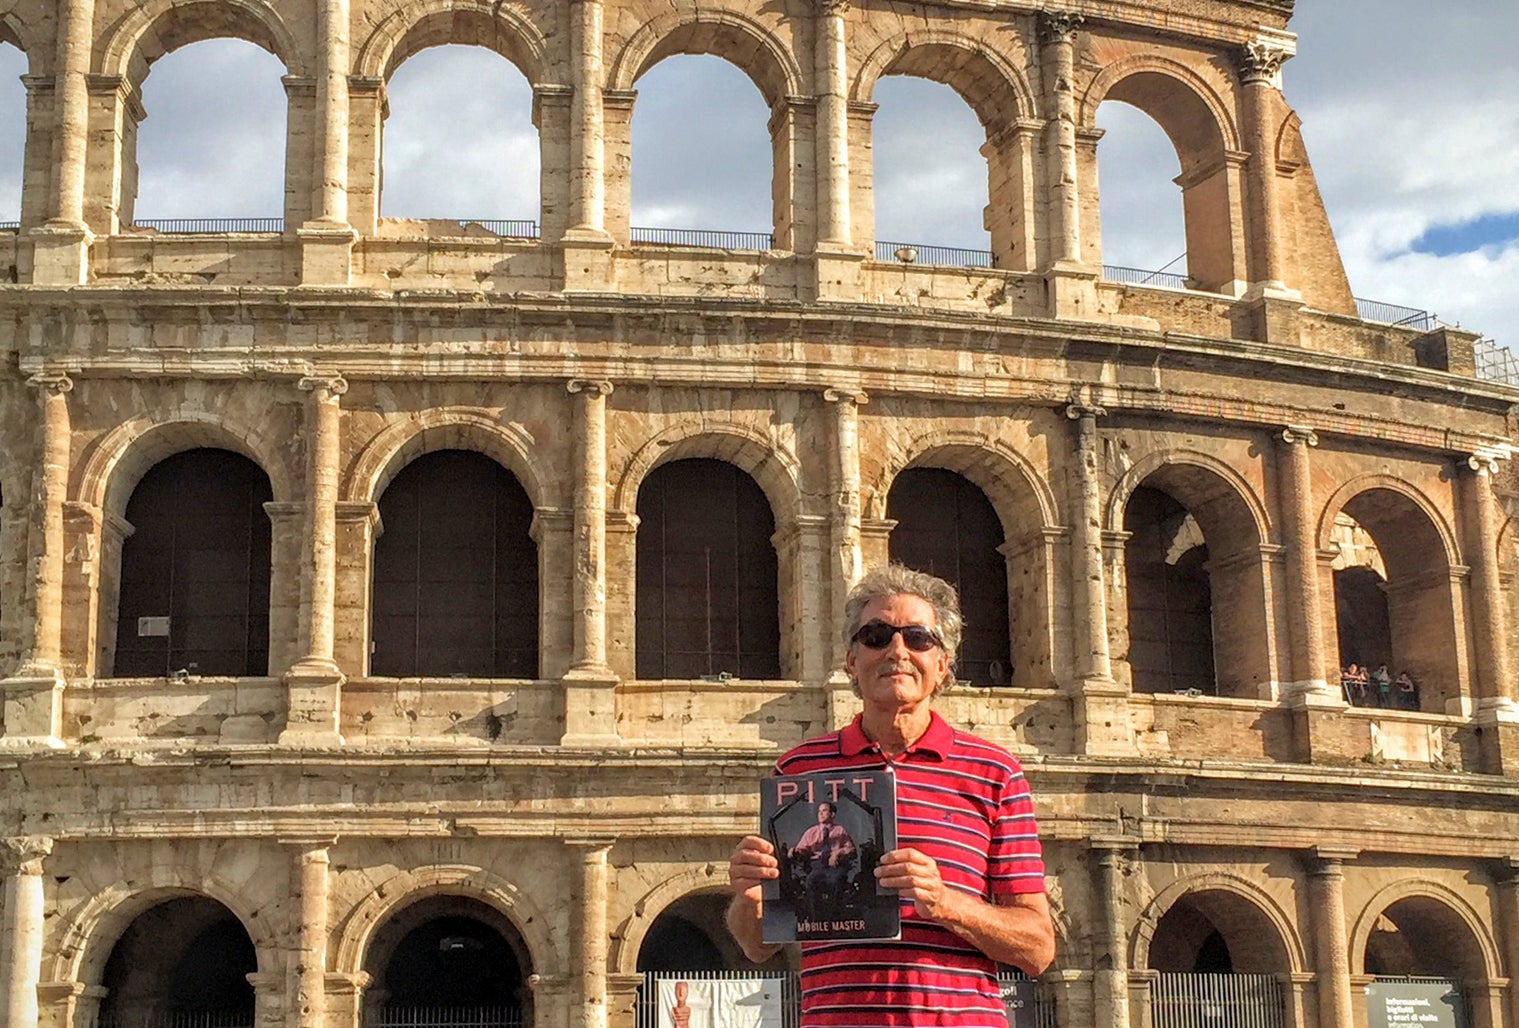 Pitt Magazine tags along with J.P. Blake (A&S ’70) on a visit to the Colosseum in Rome, Italy. 